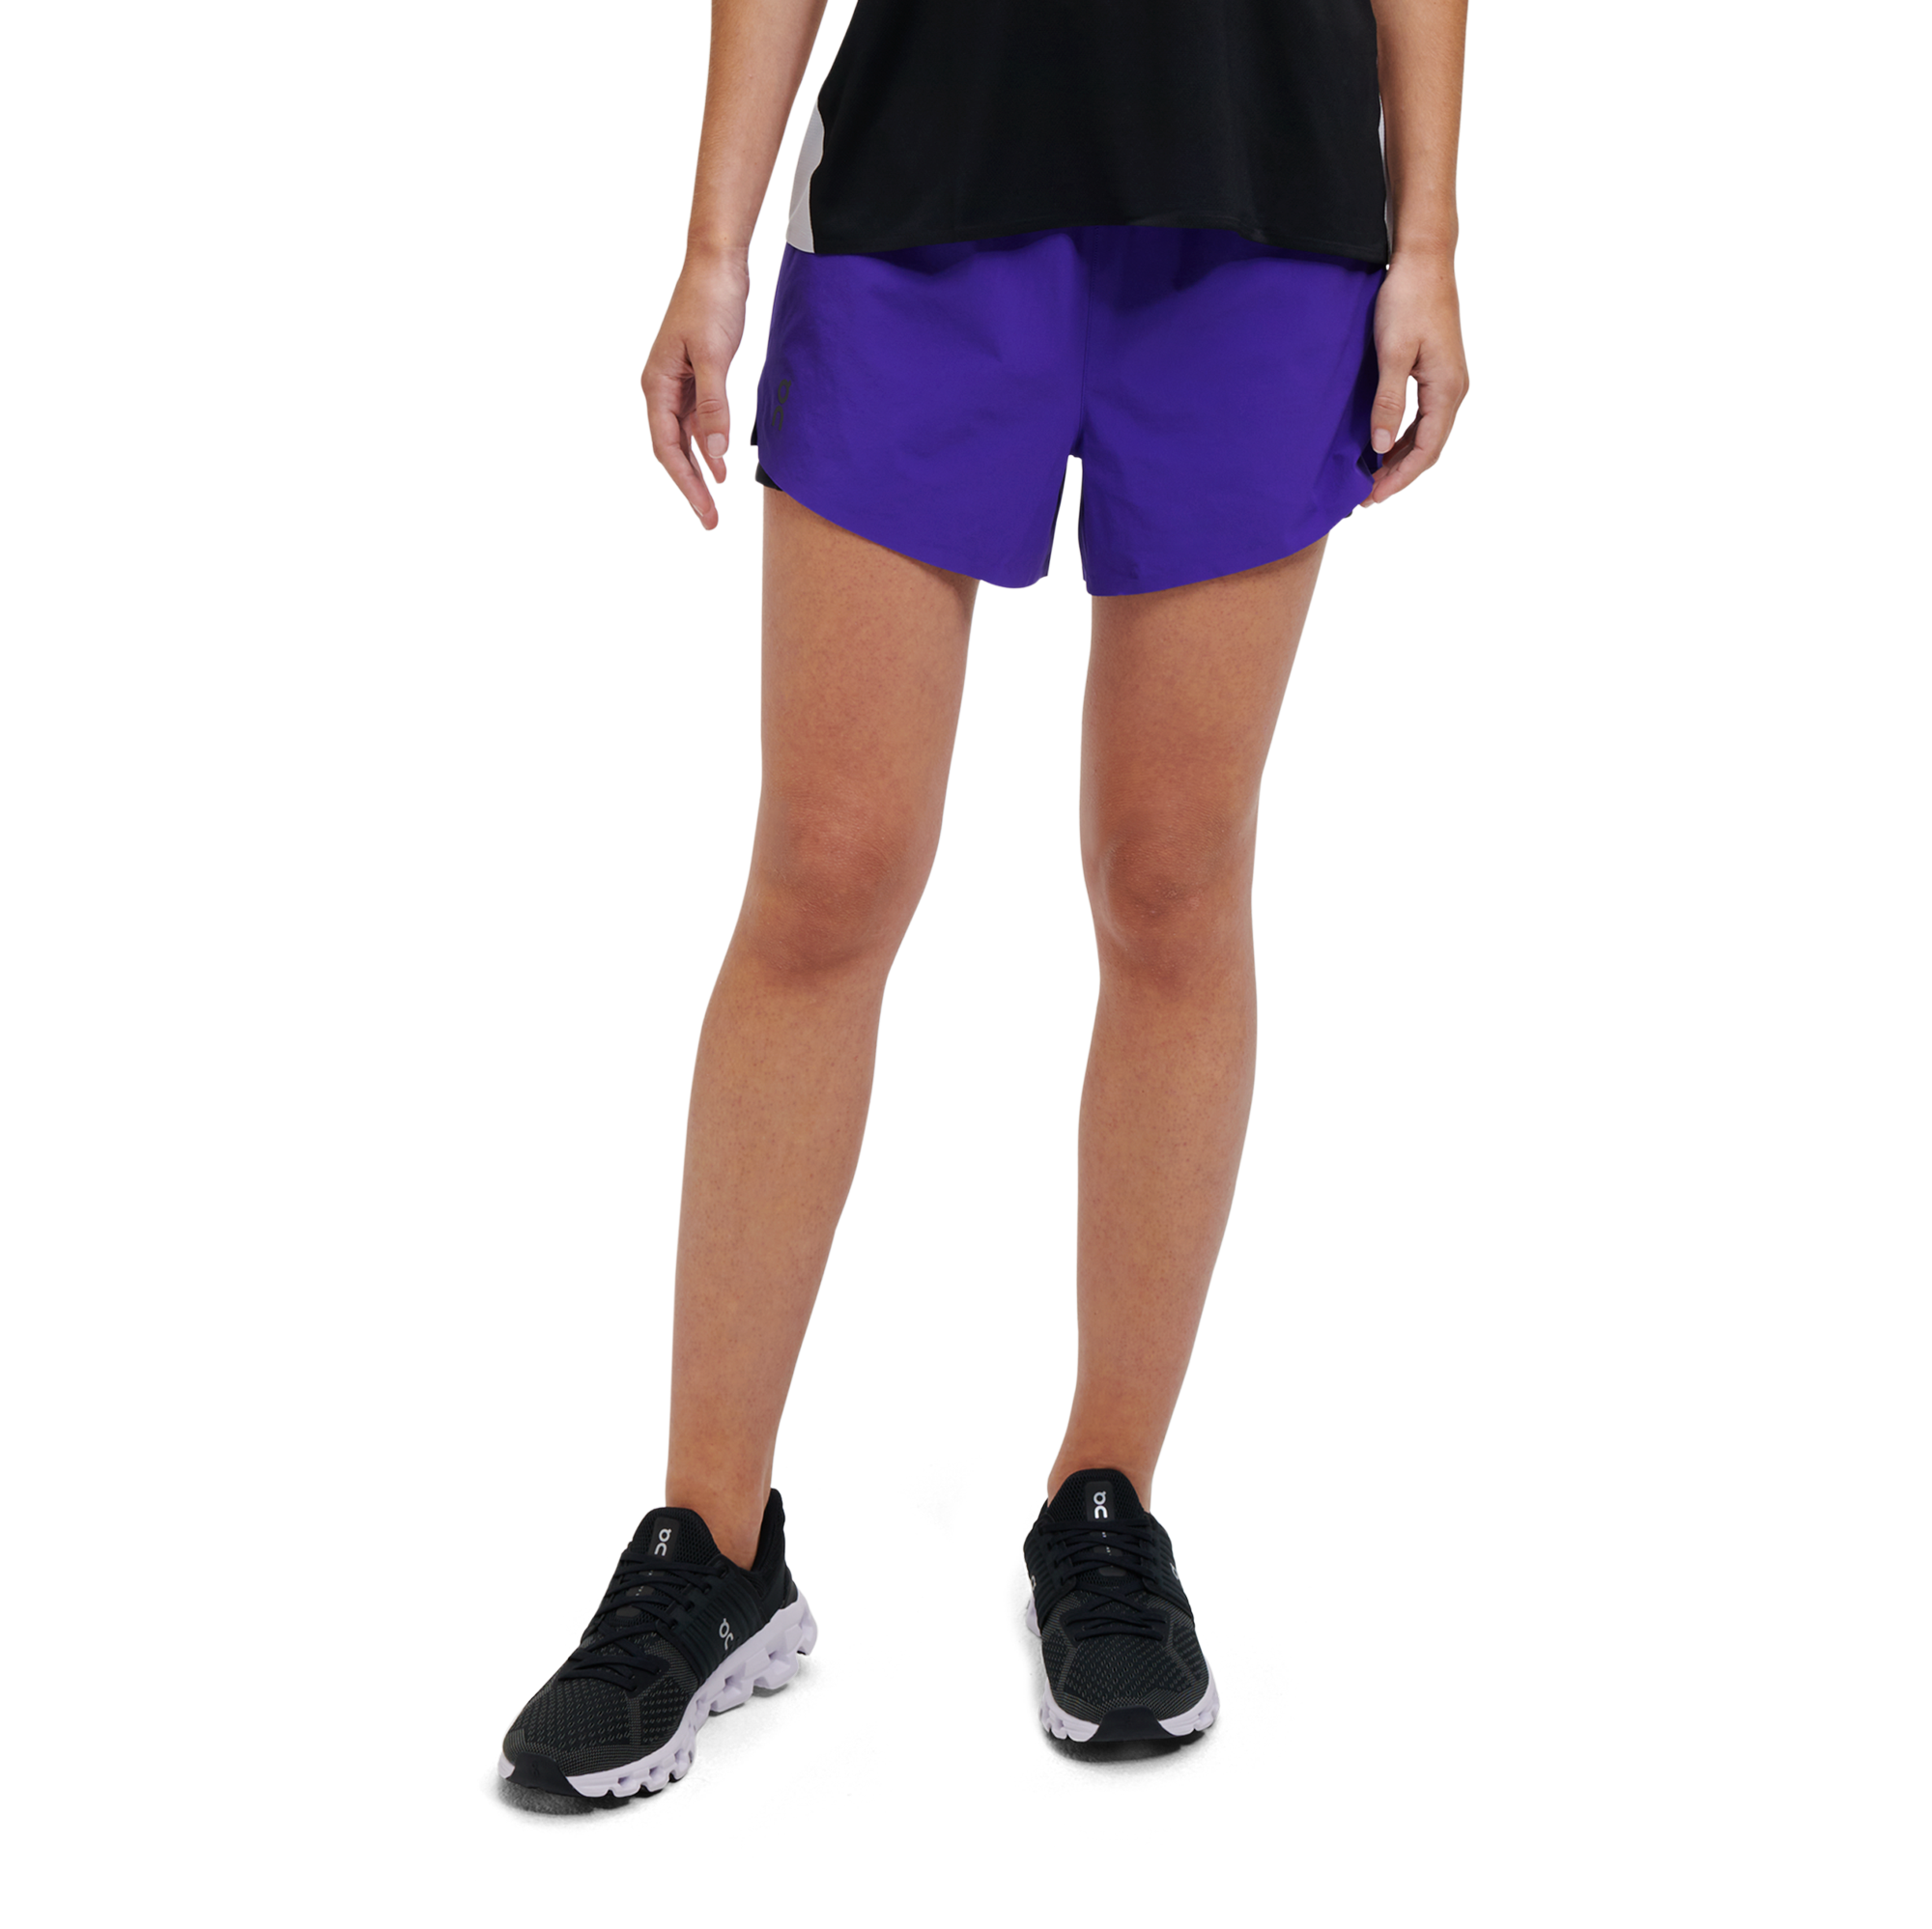 Oalka Women's Quick Dry Running Shorts Lined Athletic Workout